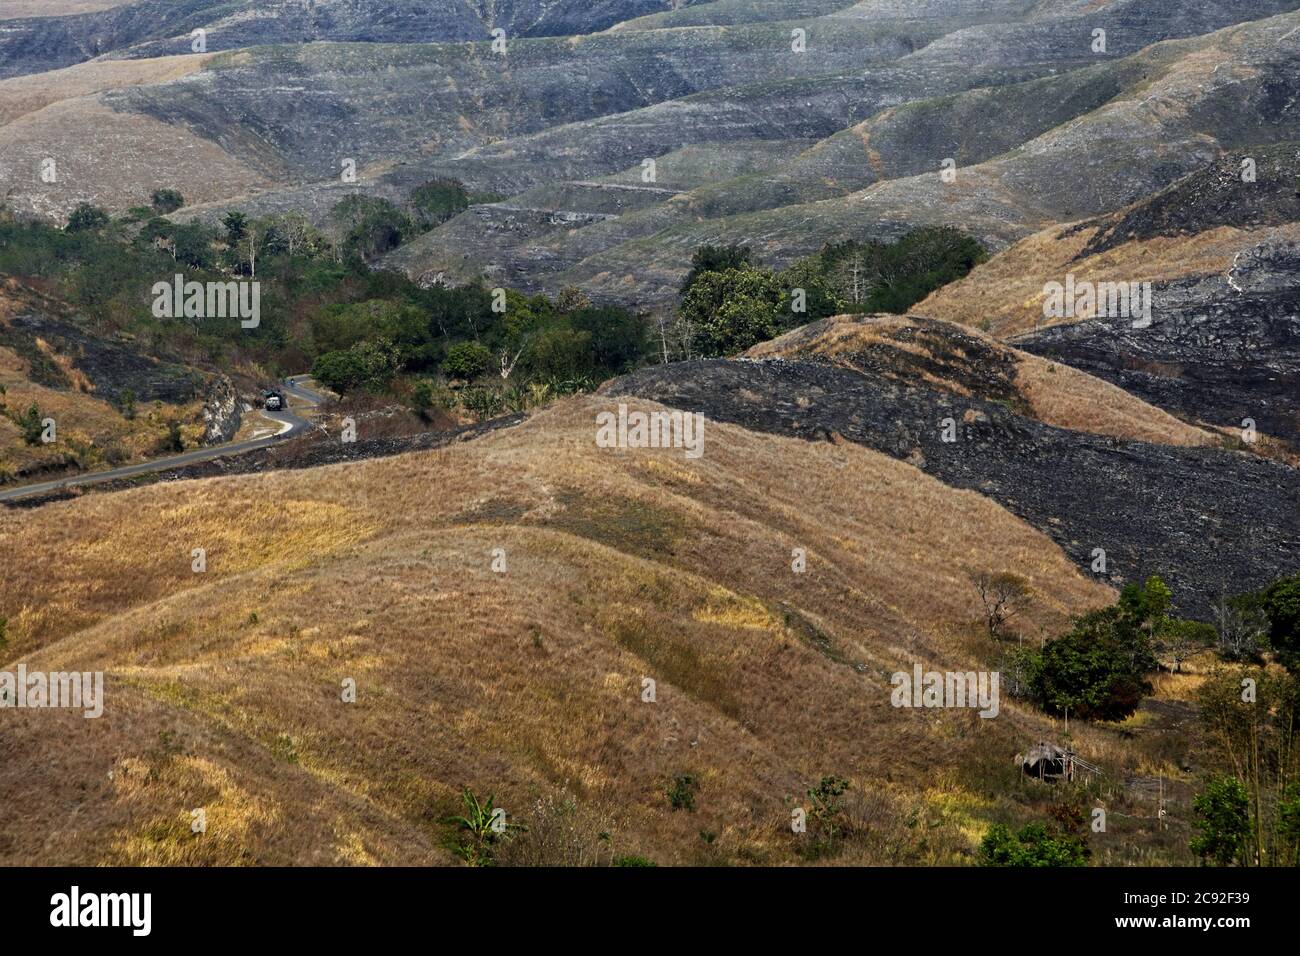 Dry grassland on hilly landscape during dry season on Wairinding hill in Sumba, and island regularly hit by drought in East Nusa Tenggara, Indonesia. Stock Photo